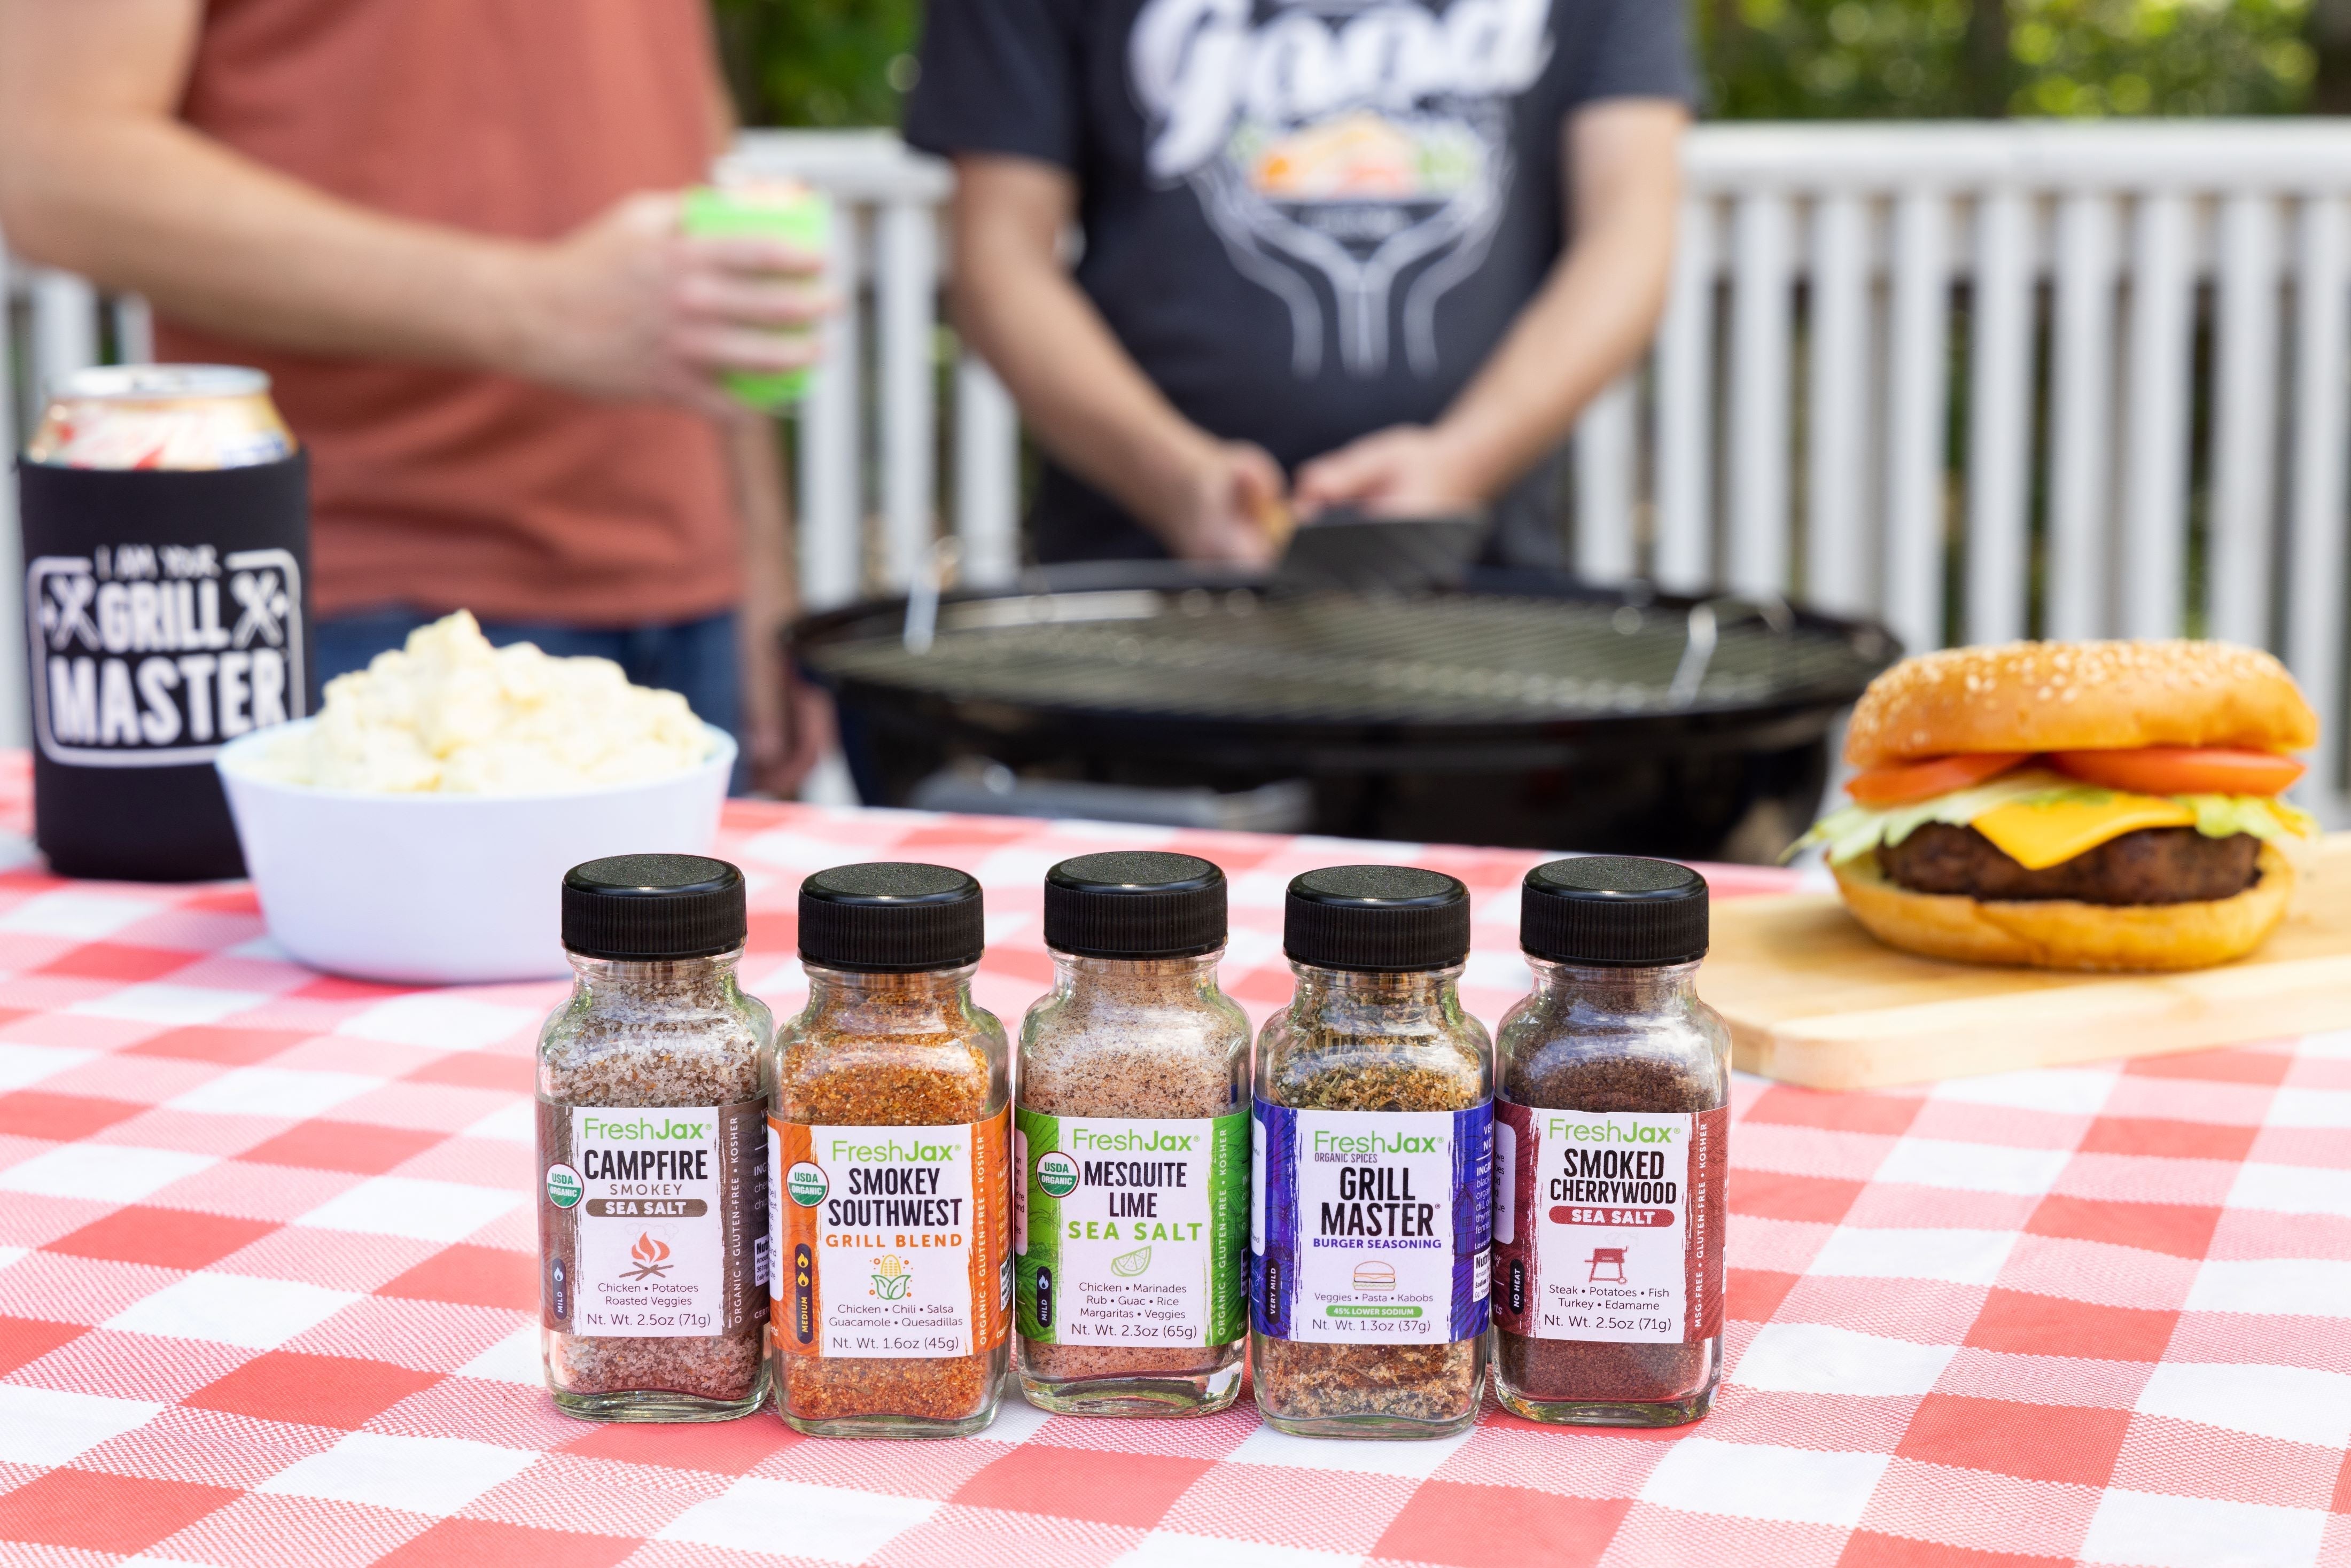 Two Dudes by a grill with FreshJax Smoked Seasonings 5 Pack